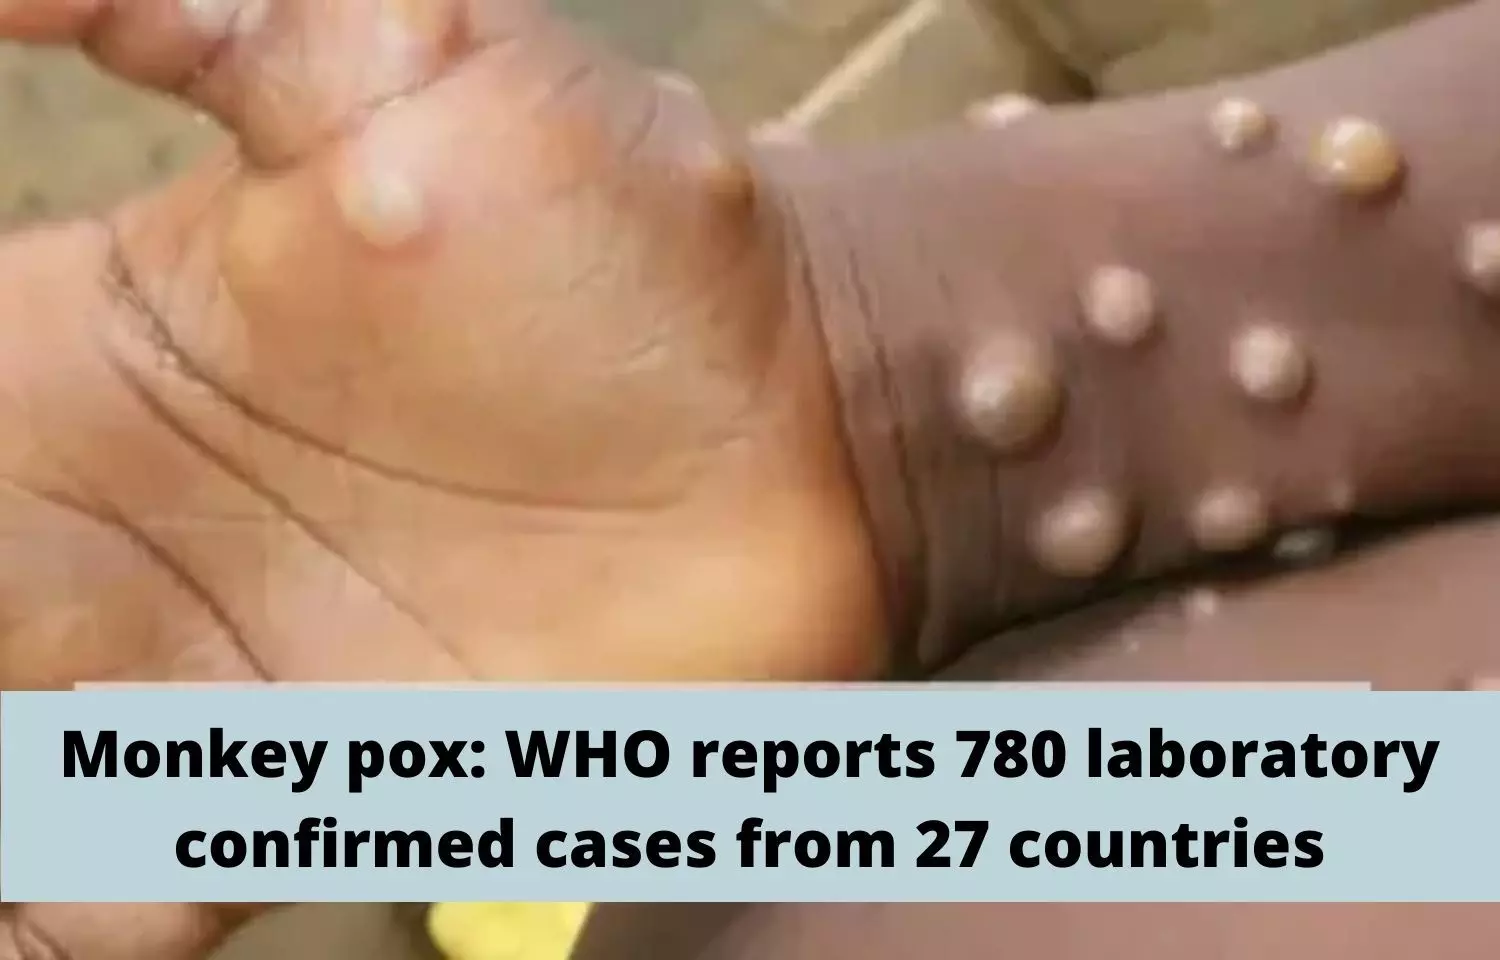 Monkey pox: WHO reports 780 laboratory confirmed cases from 27 countries